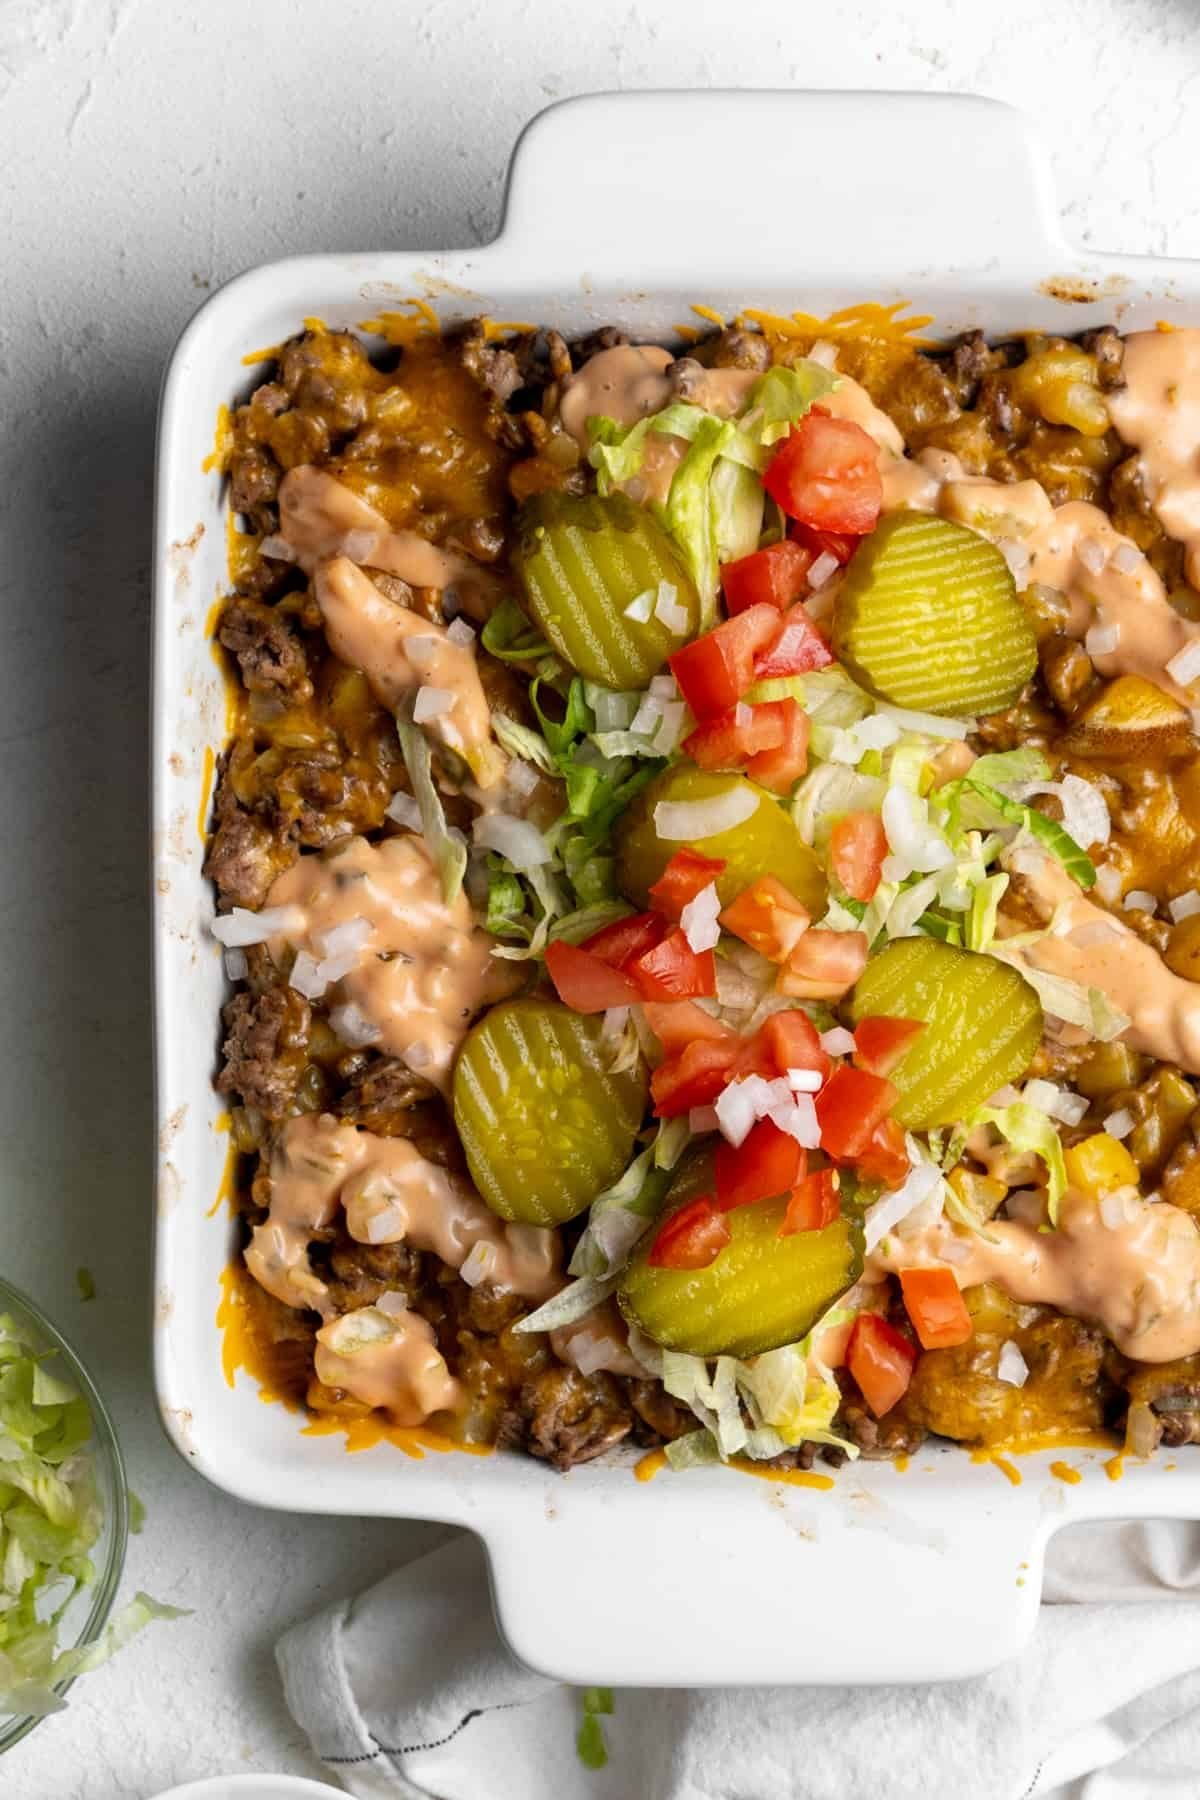 Big mac casserole topped with pickles, tomatoes, and lettuce.